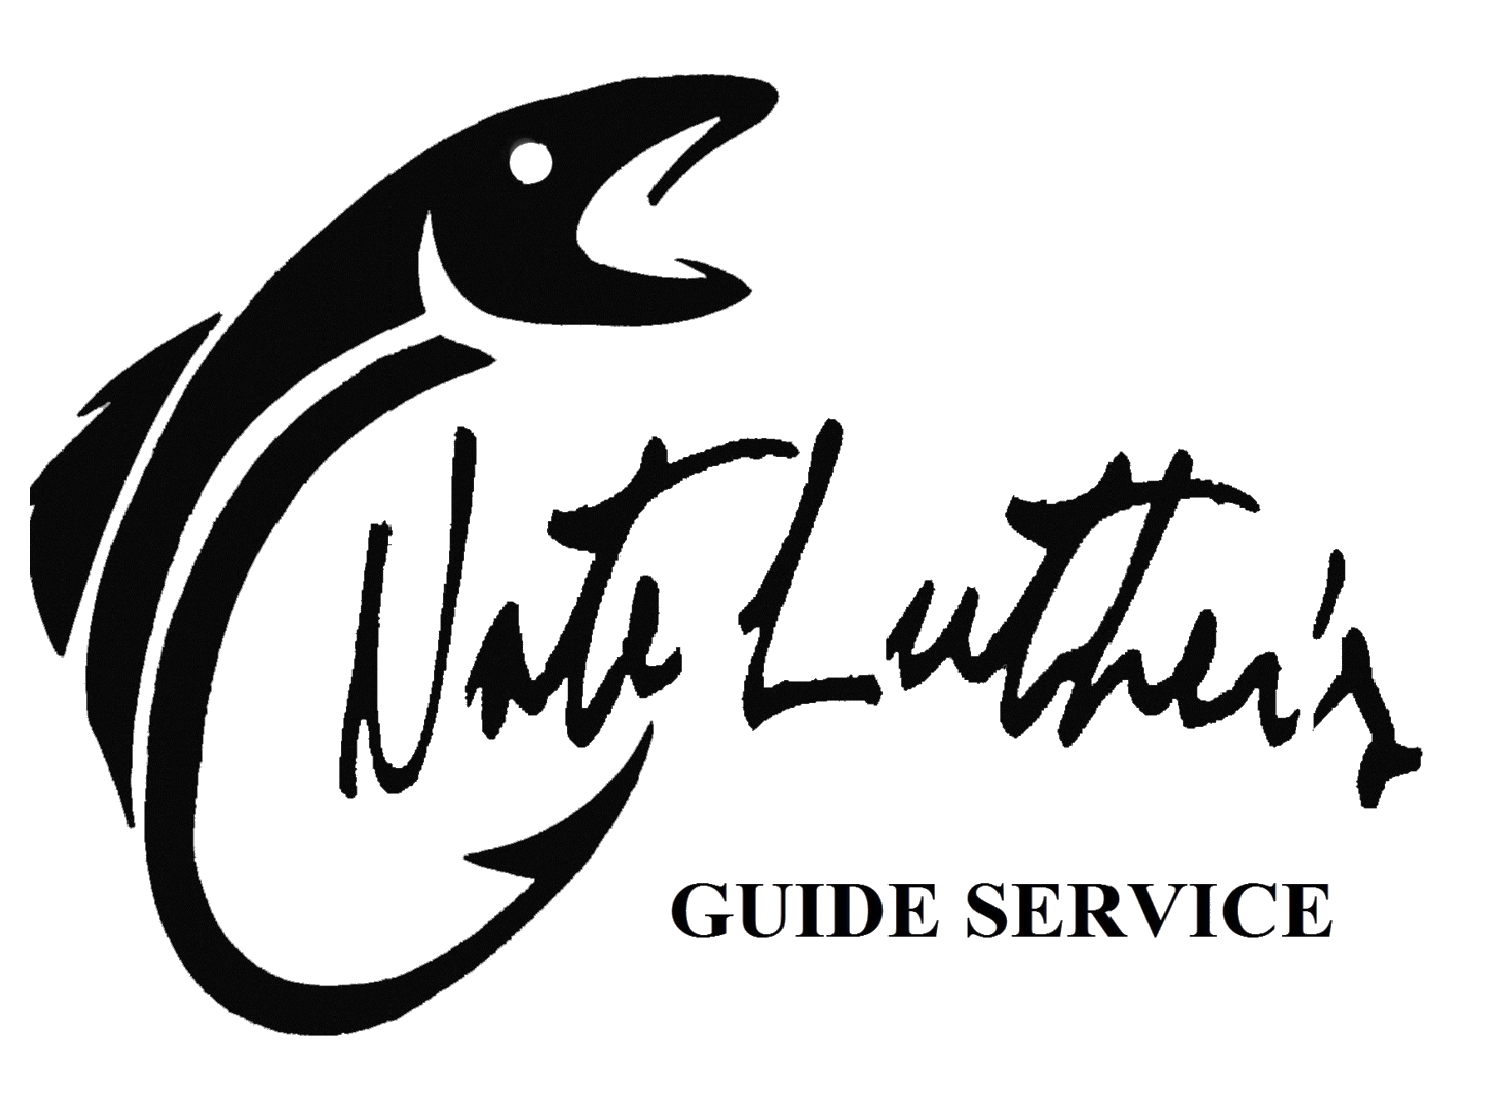 Nate Luther's Guide Service